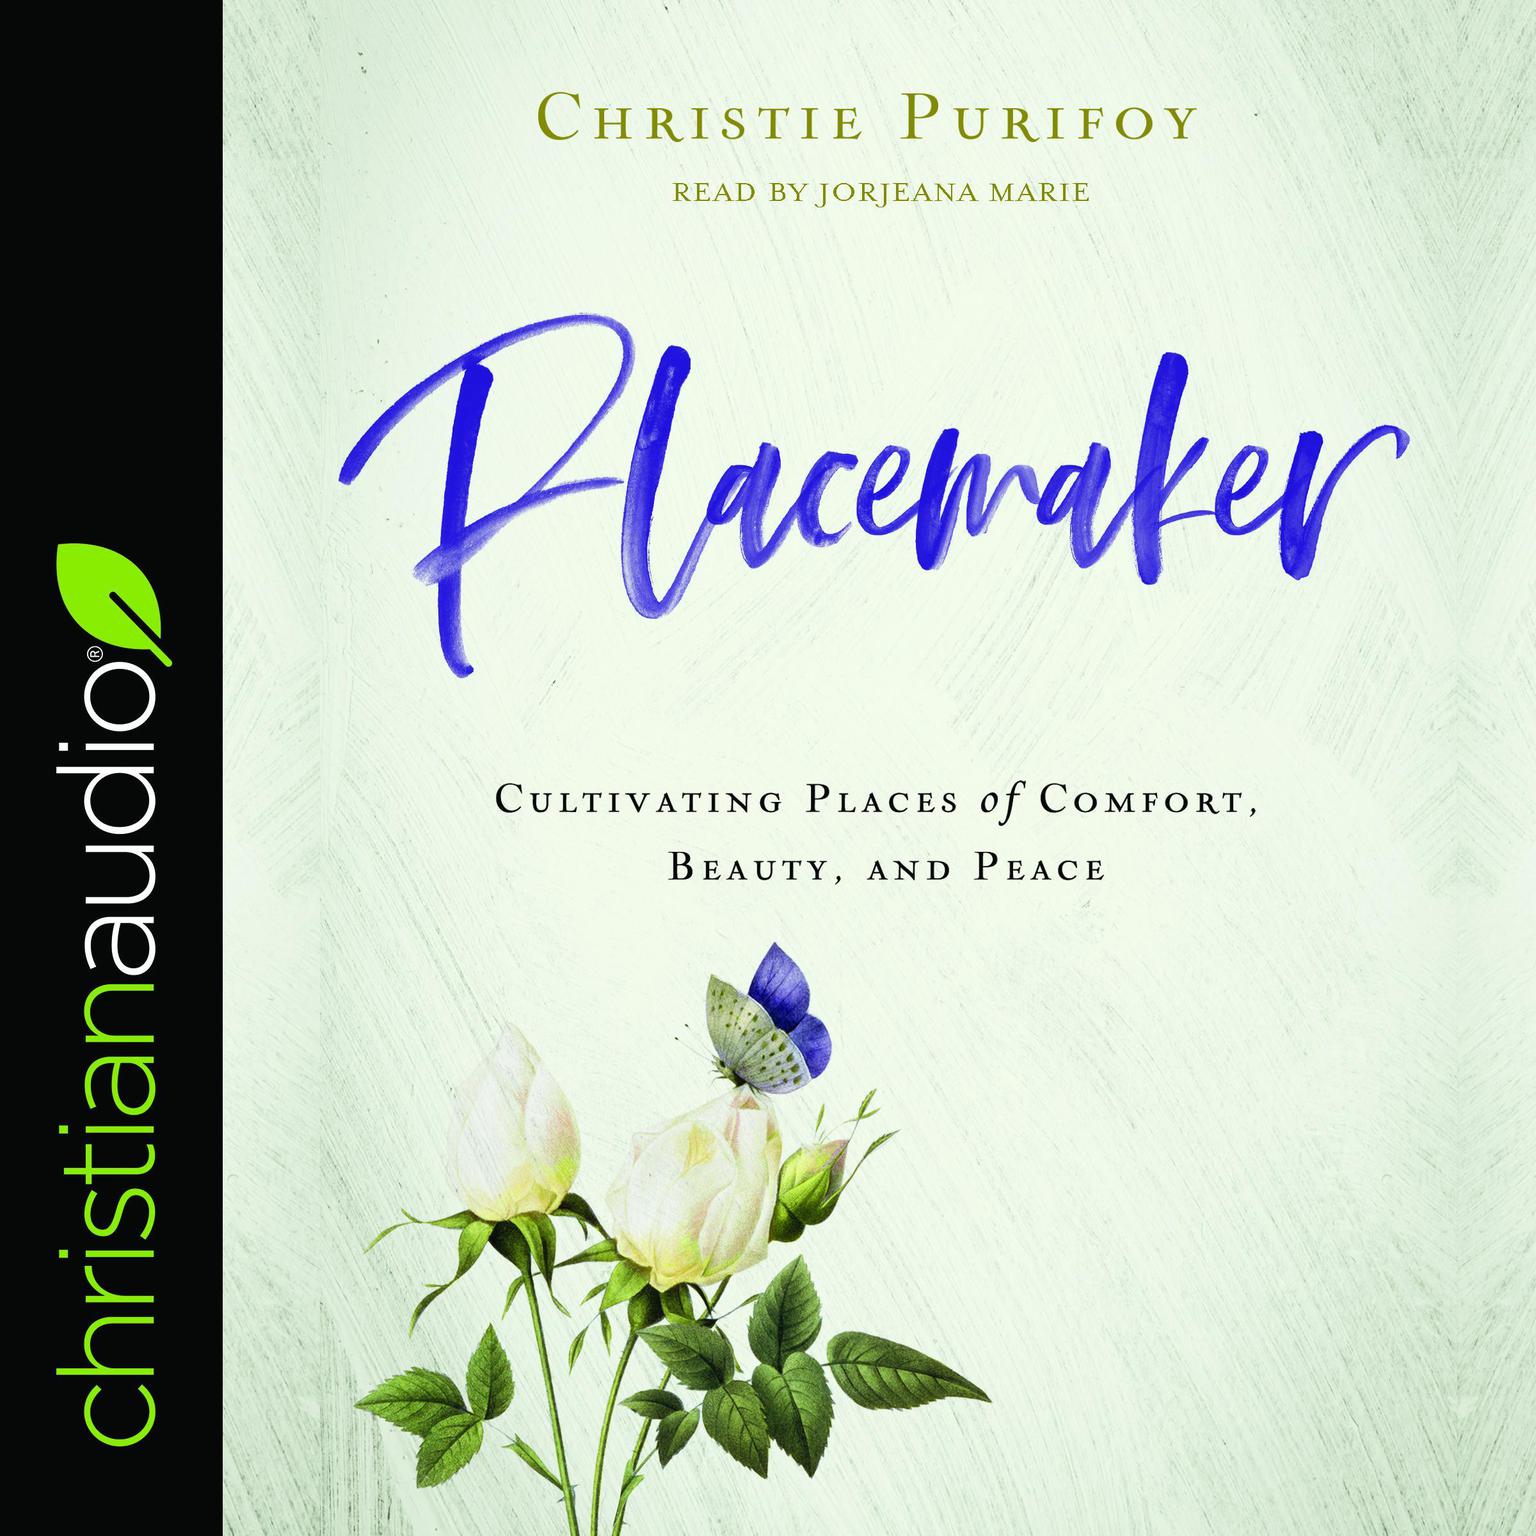 Placemaker: Cultivating Places of Comfort, Beauty, and Peace Audiobook, by Christie Purifoy